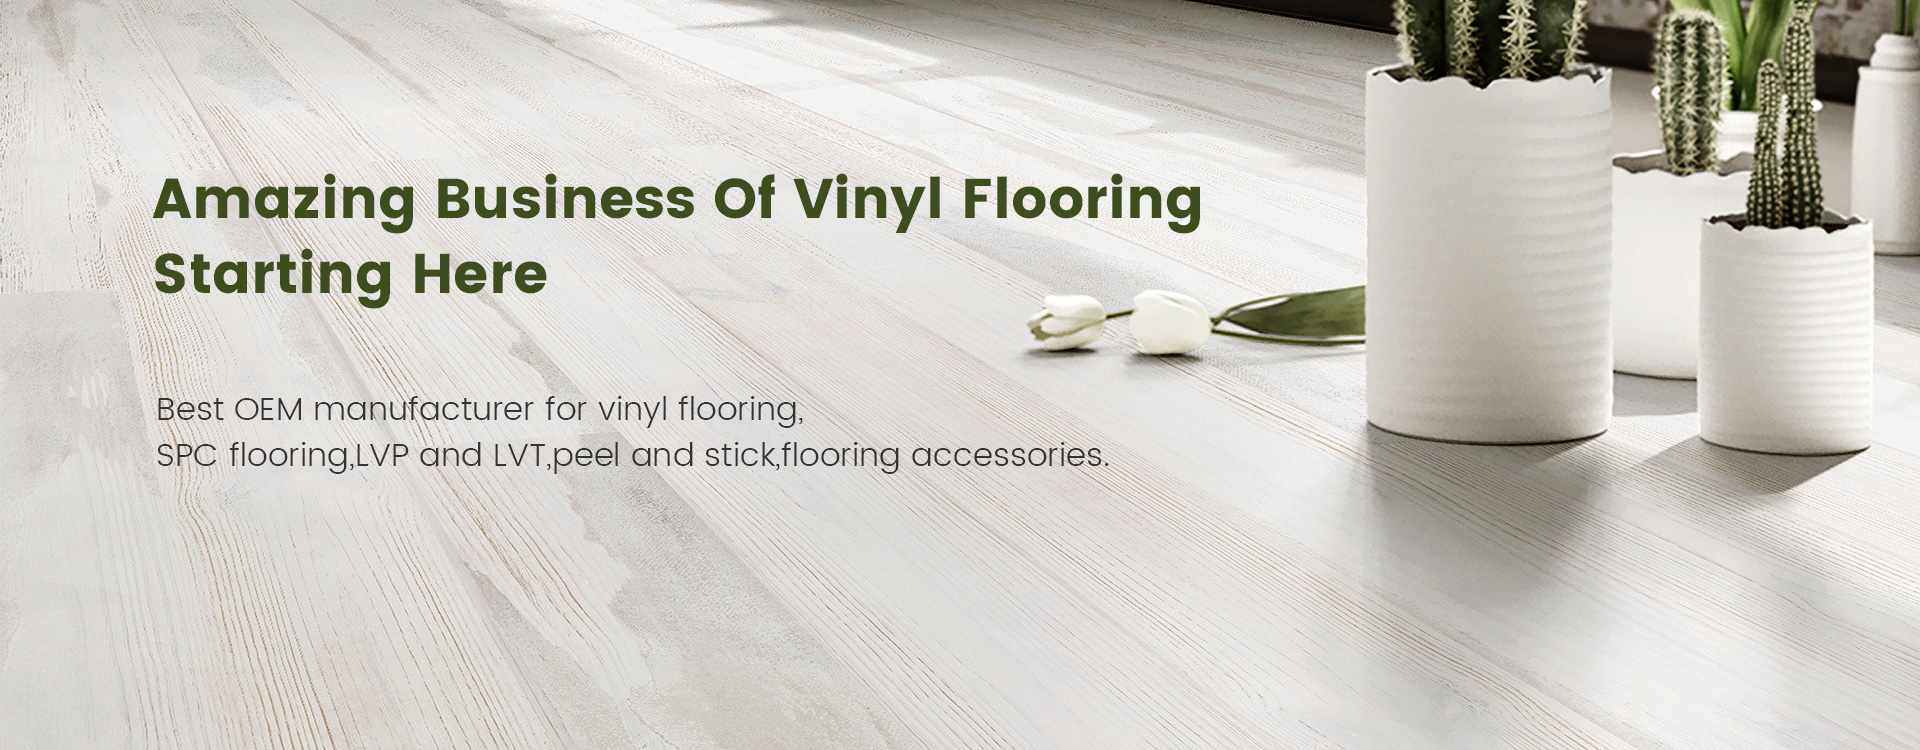 SPC Flooring Pros And Cons